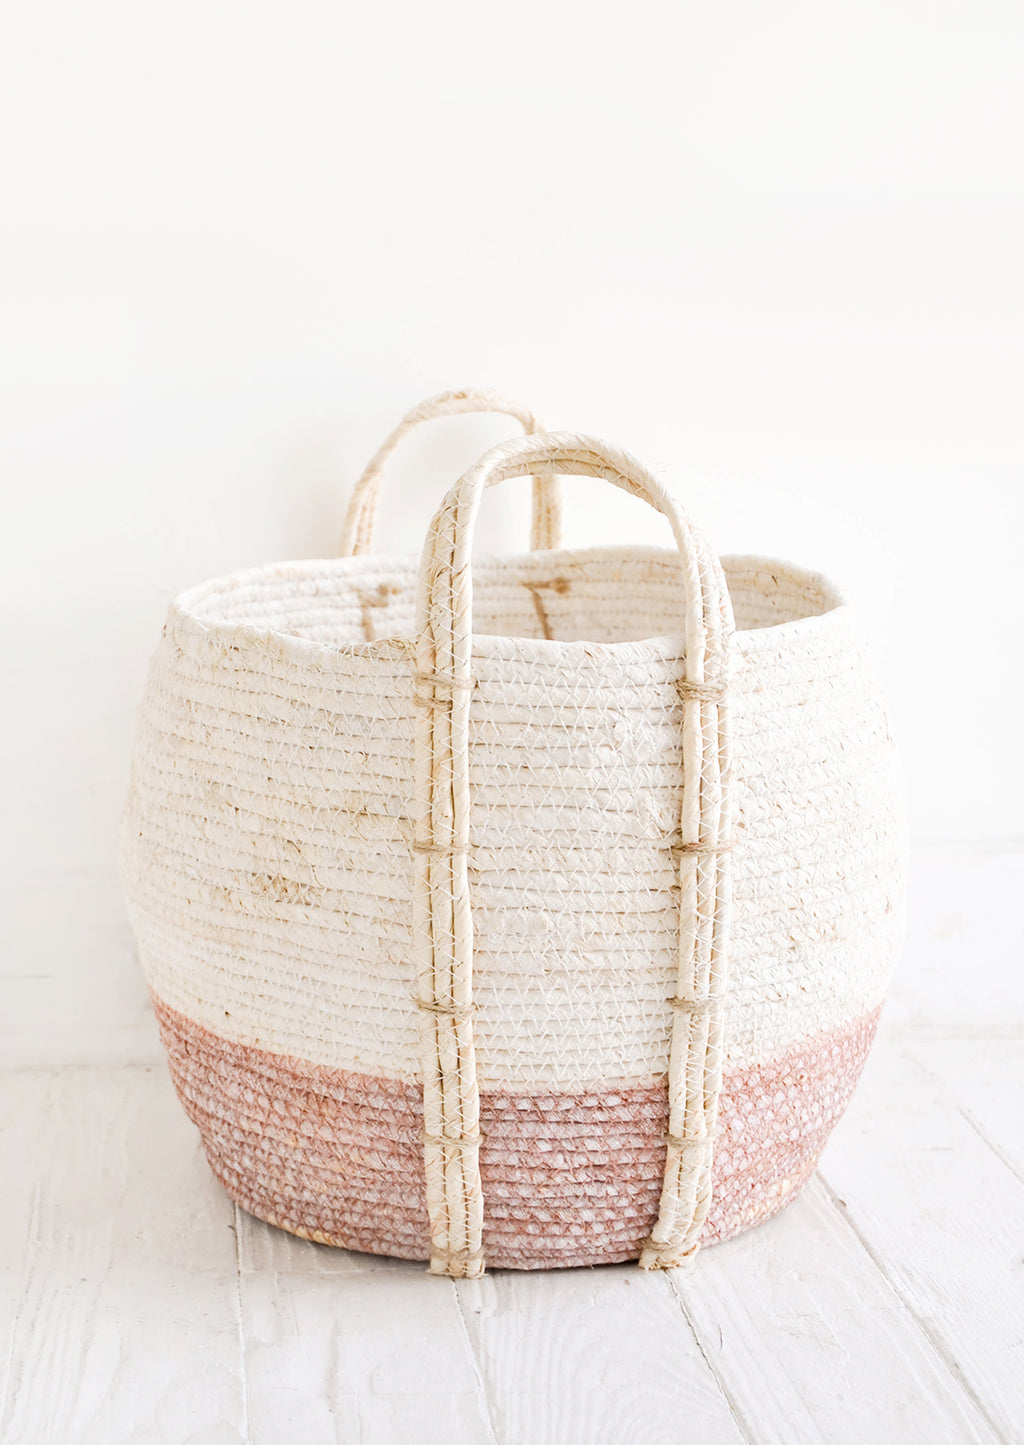 Dusty Rose / Low [Large]: Round storage basket made from natural maize fiber, fiber handles attached at sides, band of contrasting pink color along bottom.